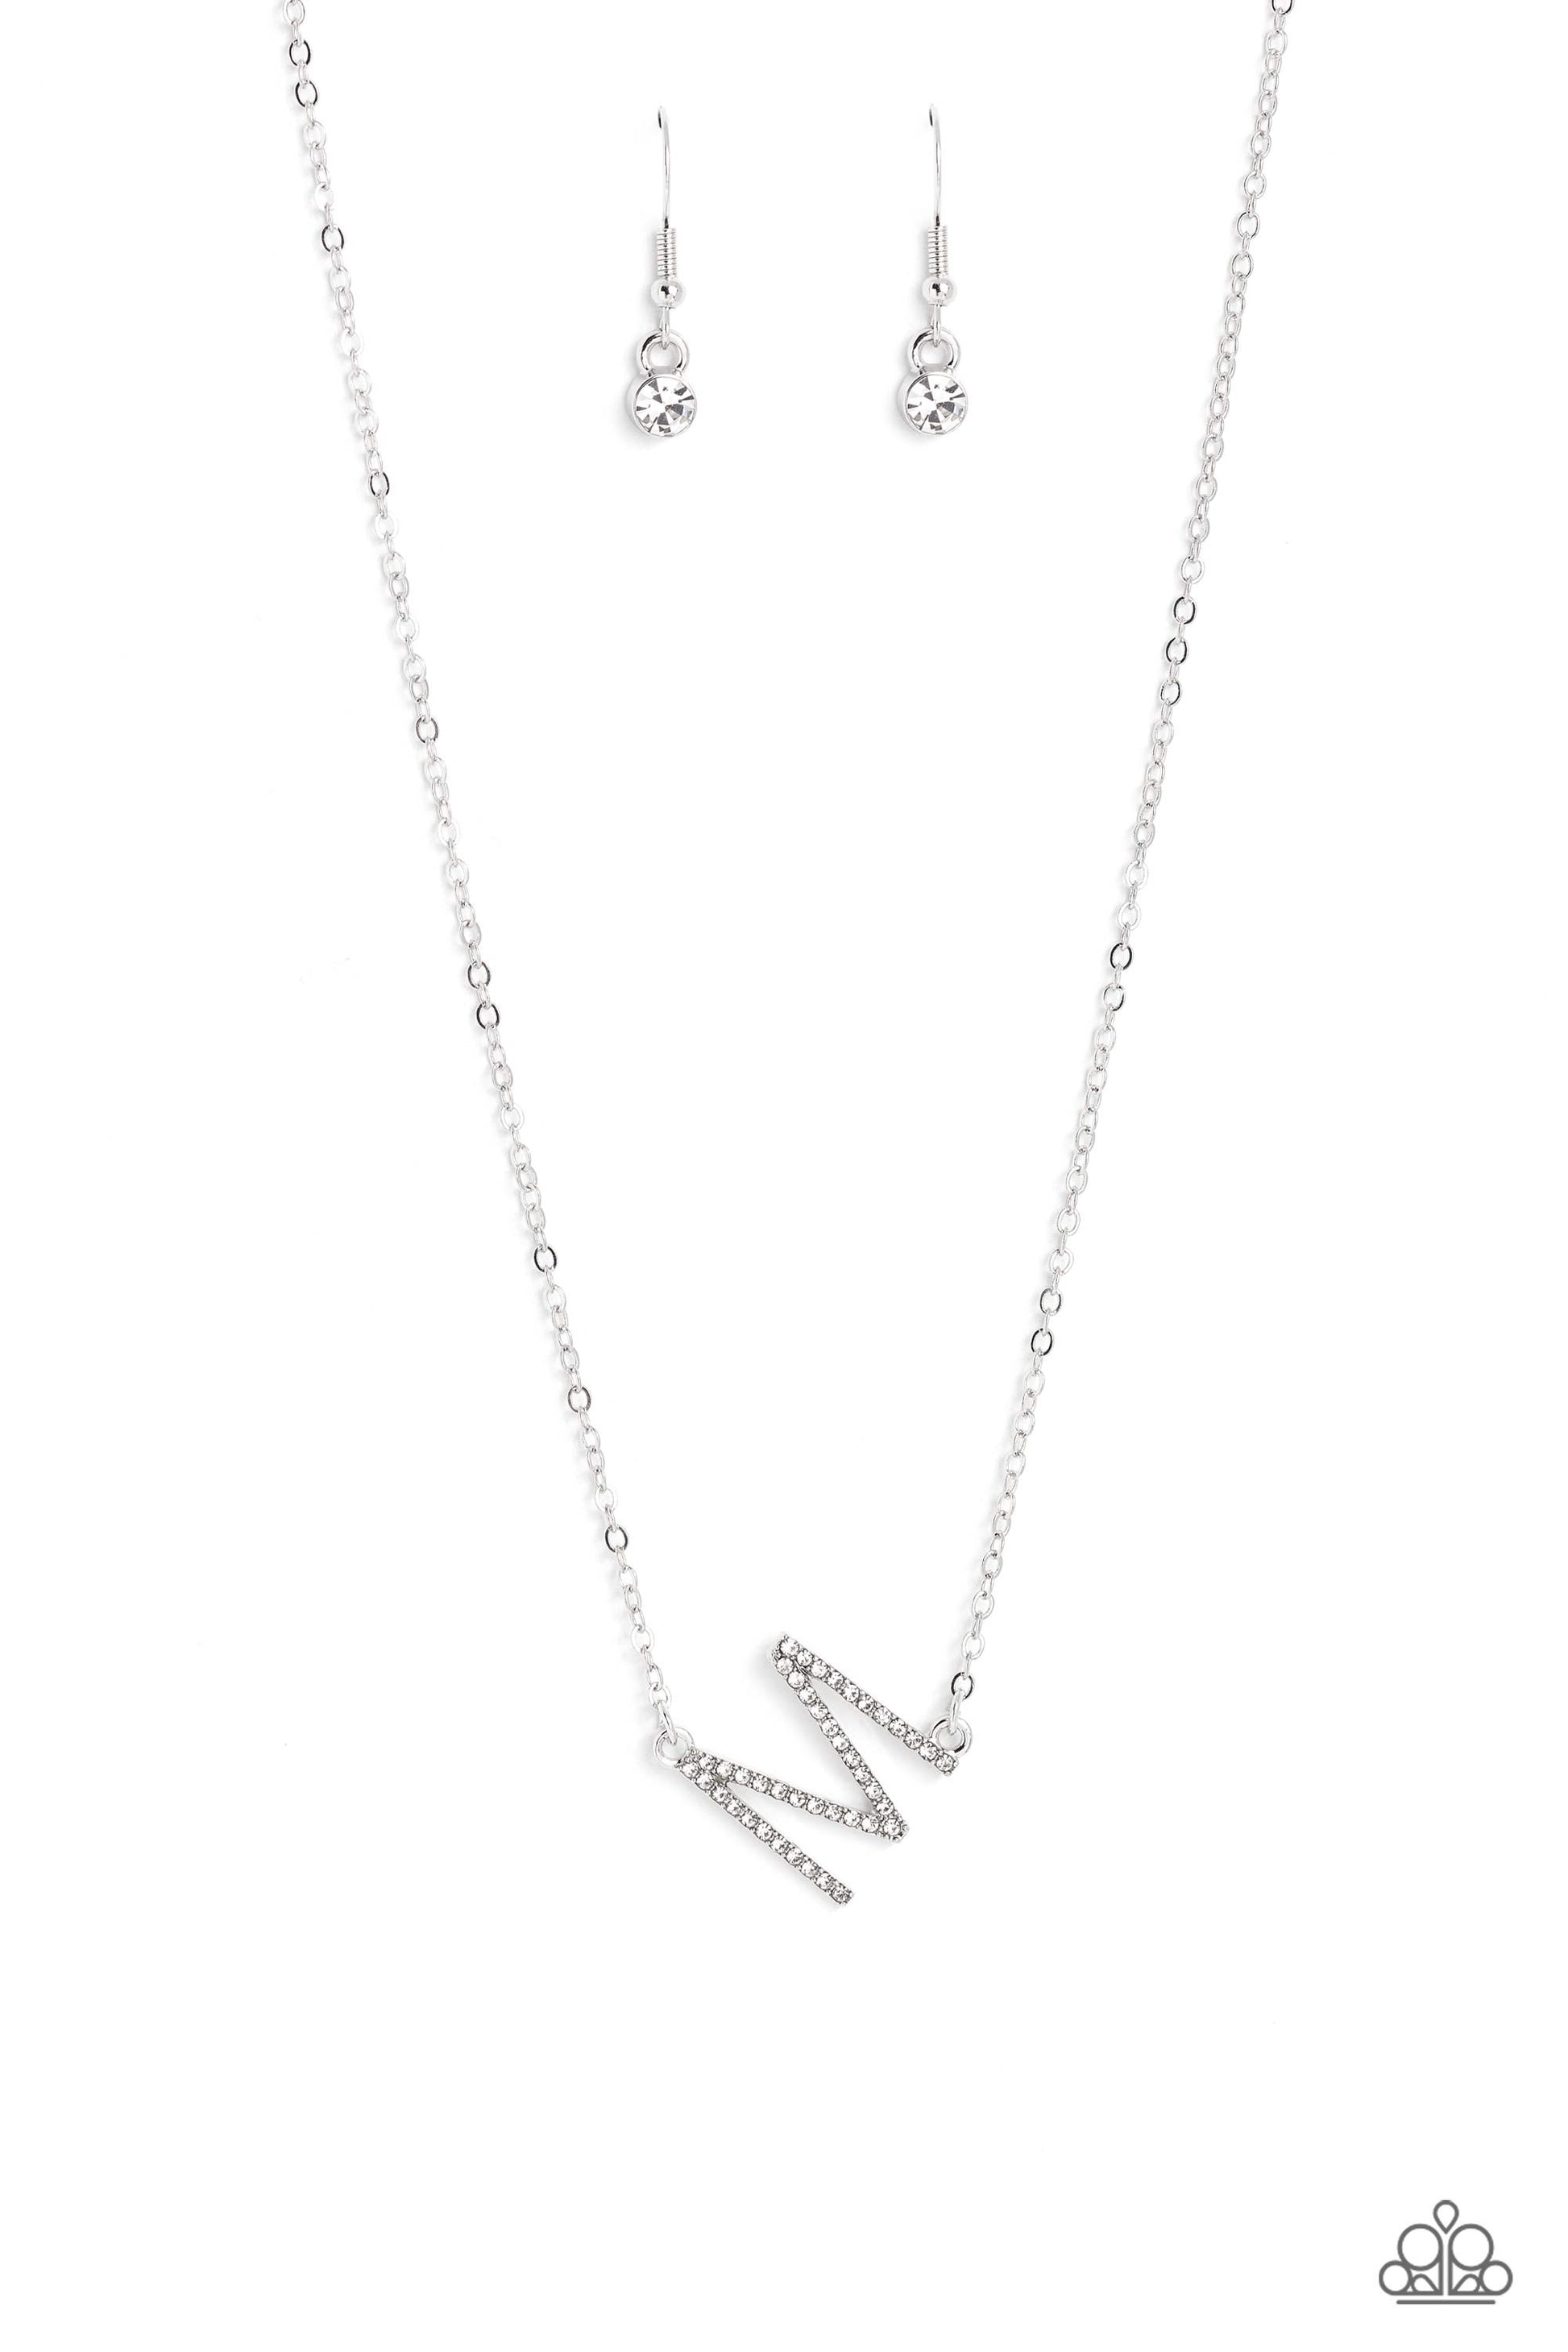 INITIALLY Yours White "M" Necklace - Paparazzi Accessories